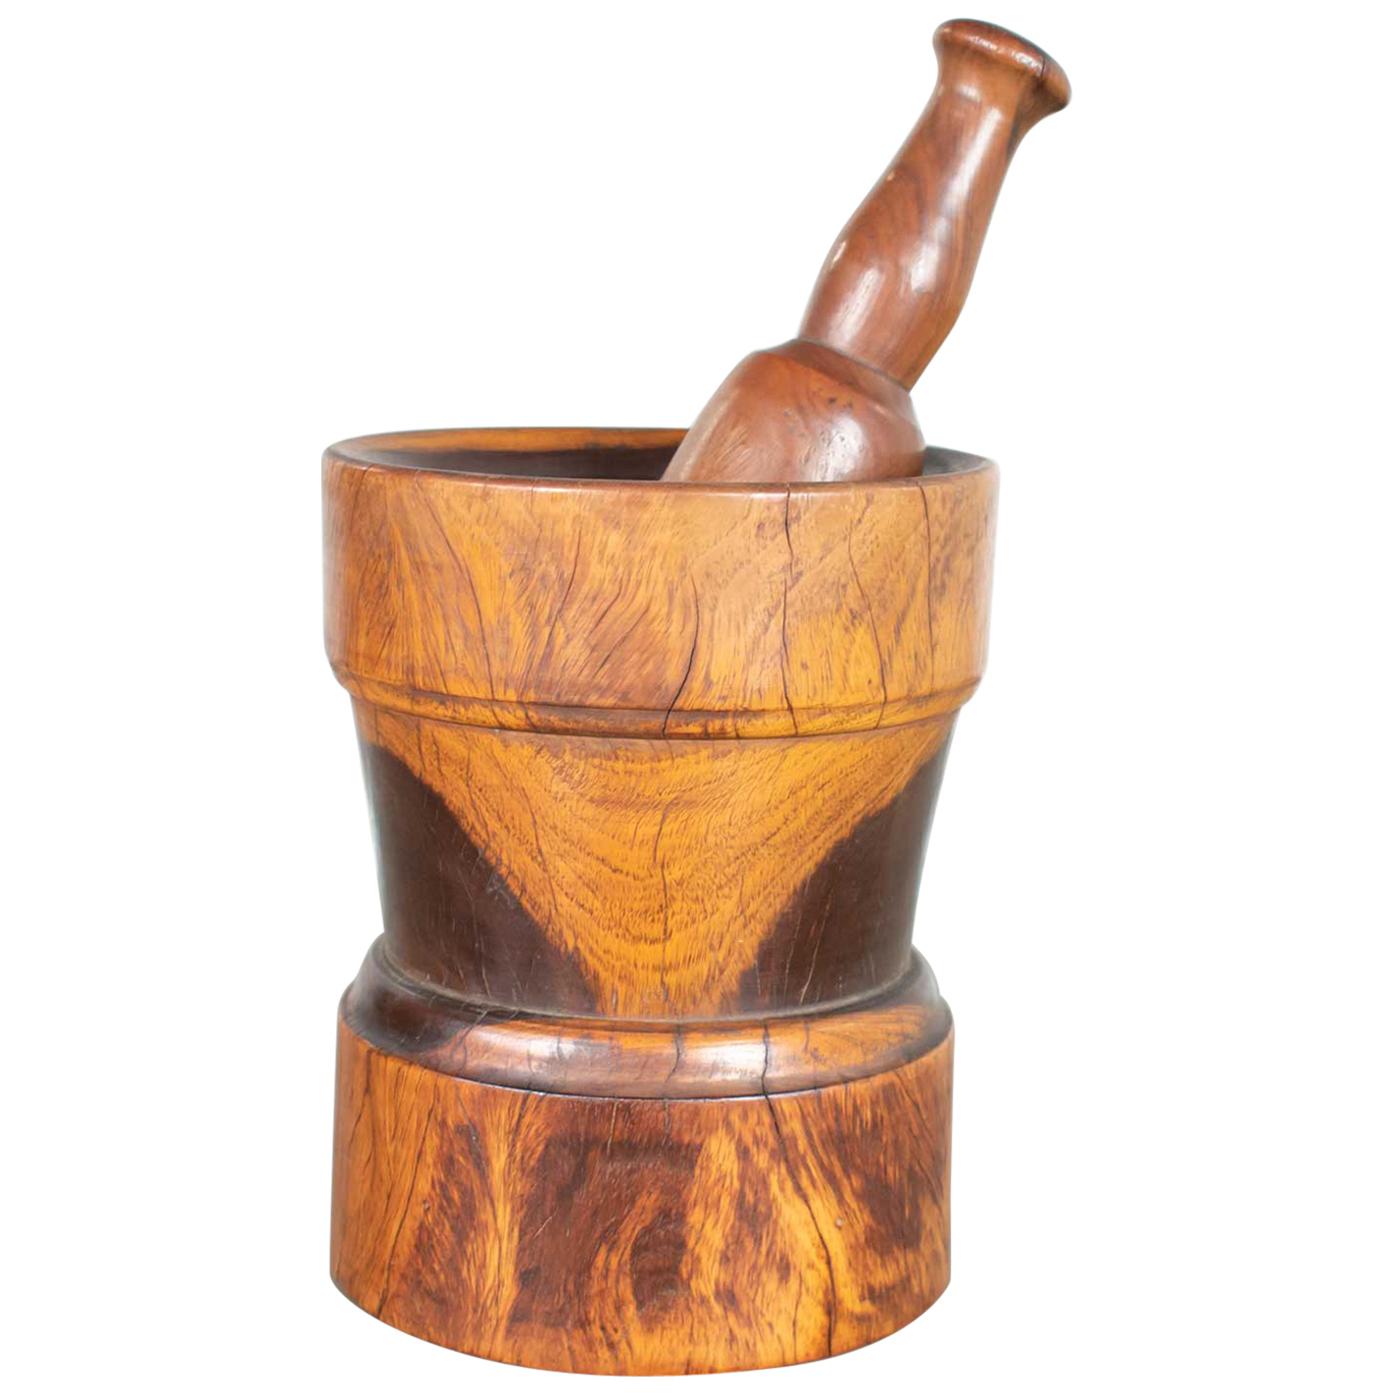 Vintage Mid-Century Modern Hand Turned Wood Mortar and Pestle 1950 For Sale